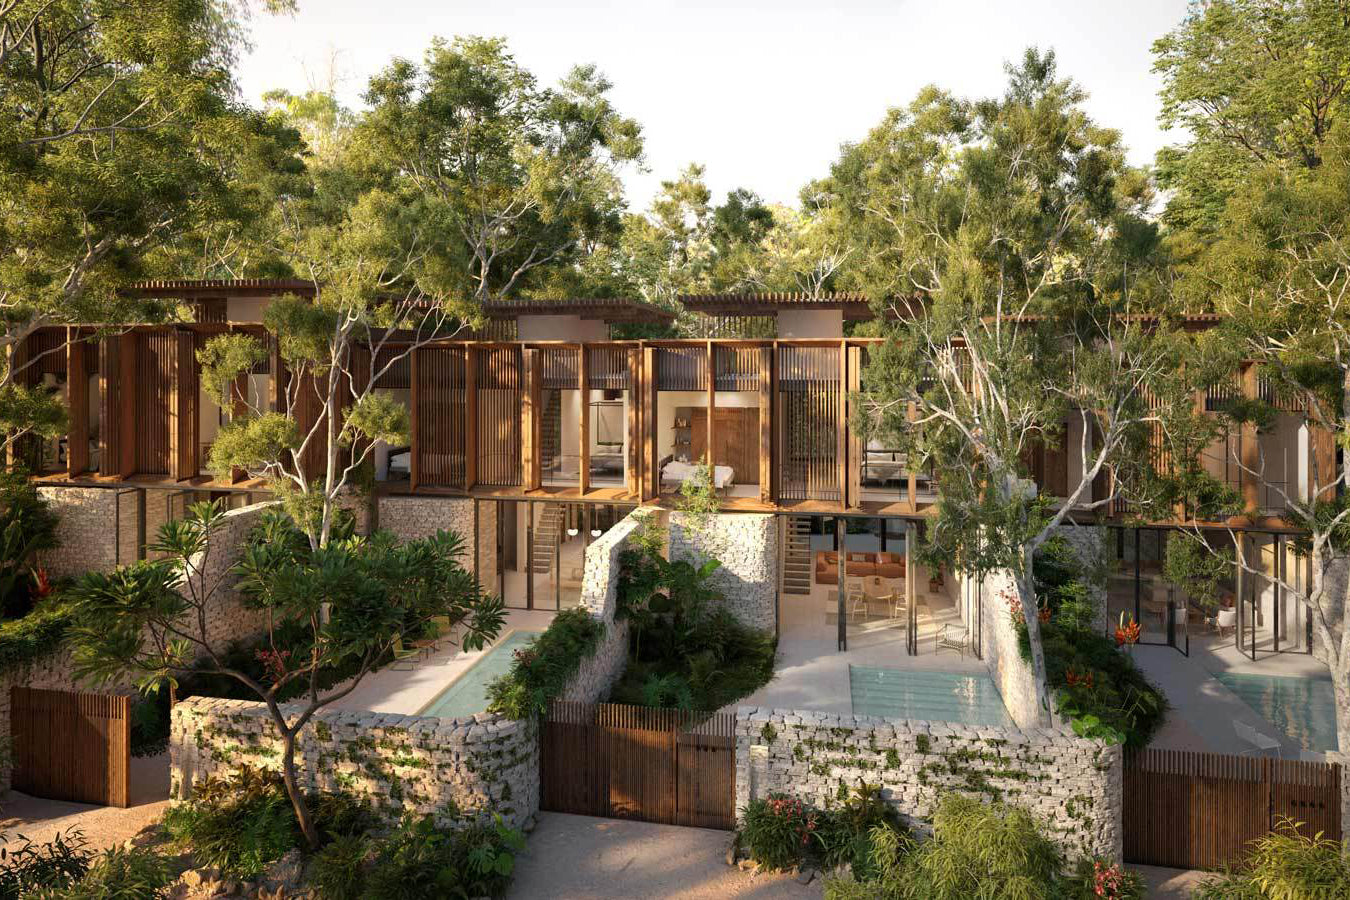 An Sneak Peak At The Upcoming K'In Sustainable Boutique Hotel In Tulum, Mexico